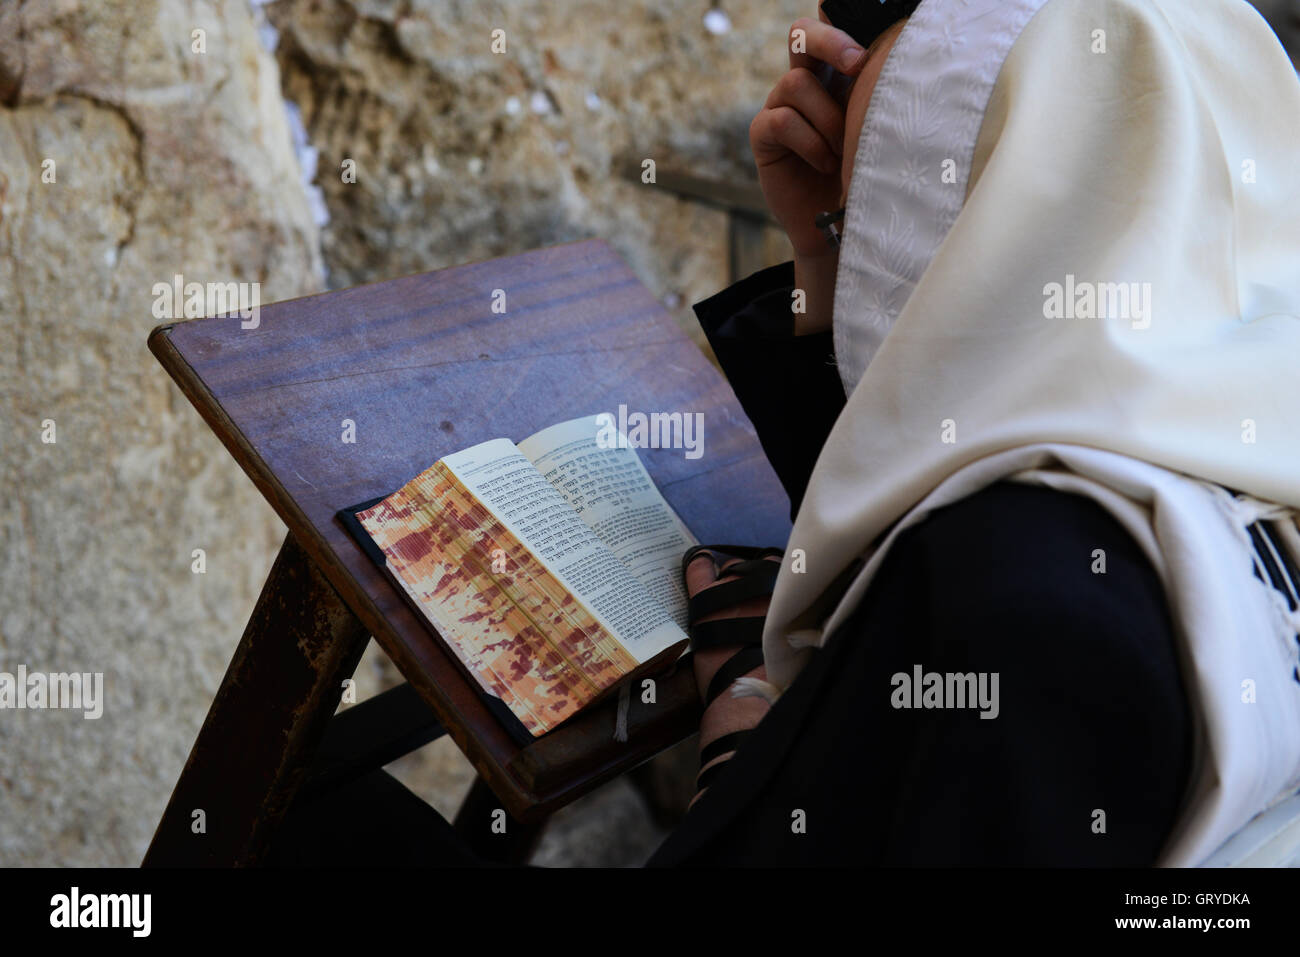 Jewish men praying by the Wailing wall in the old city of Jerusalem. Stock Photo